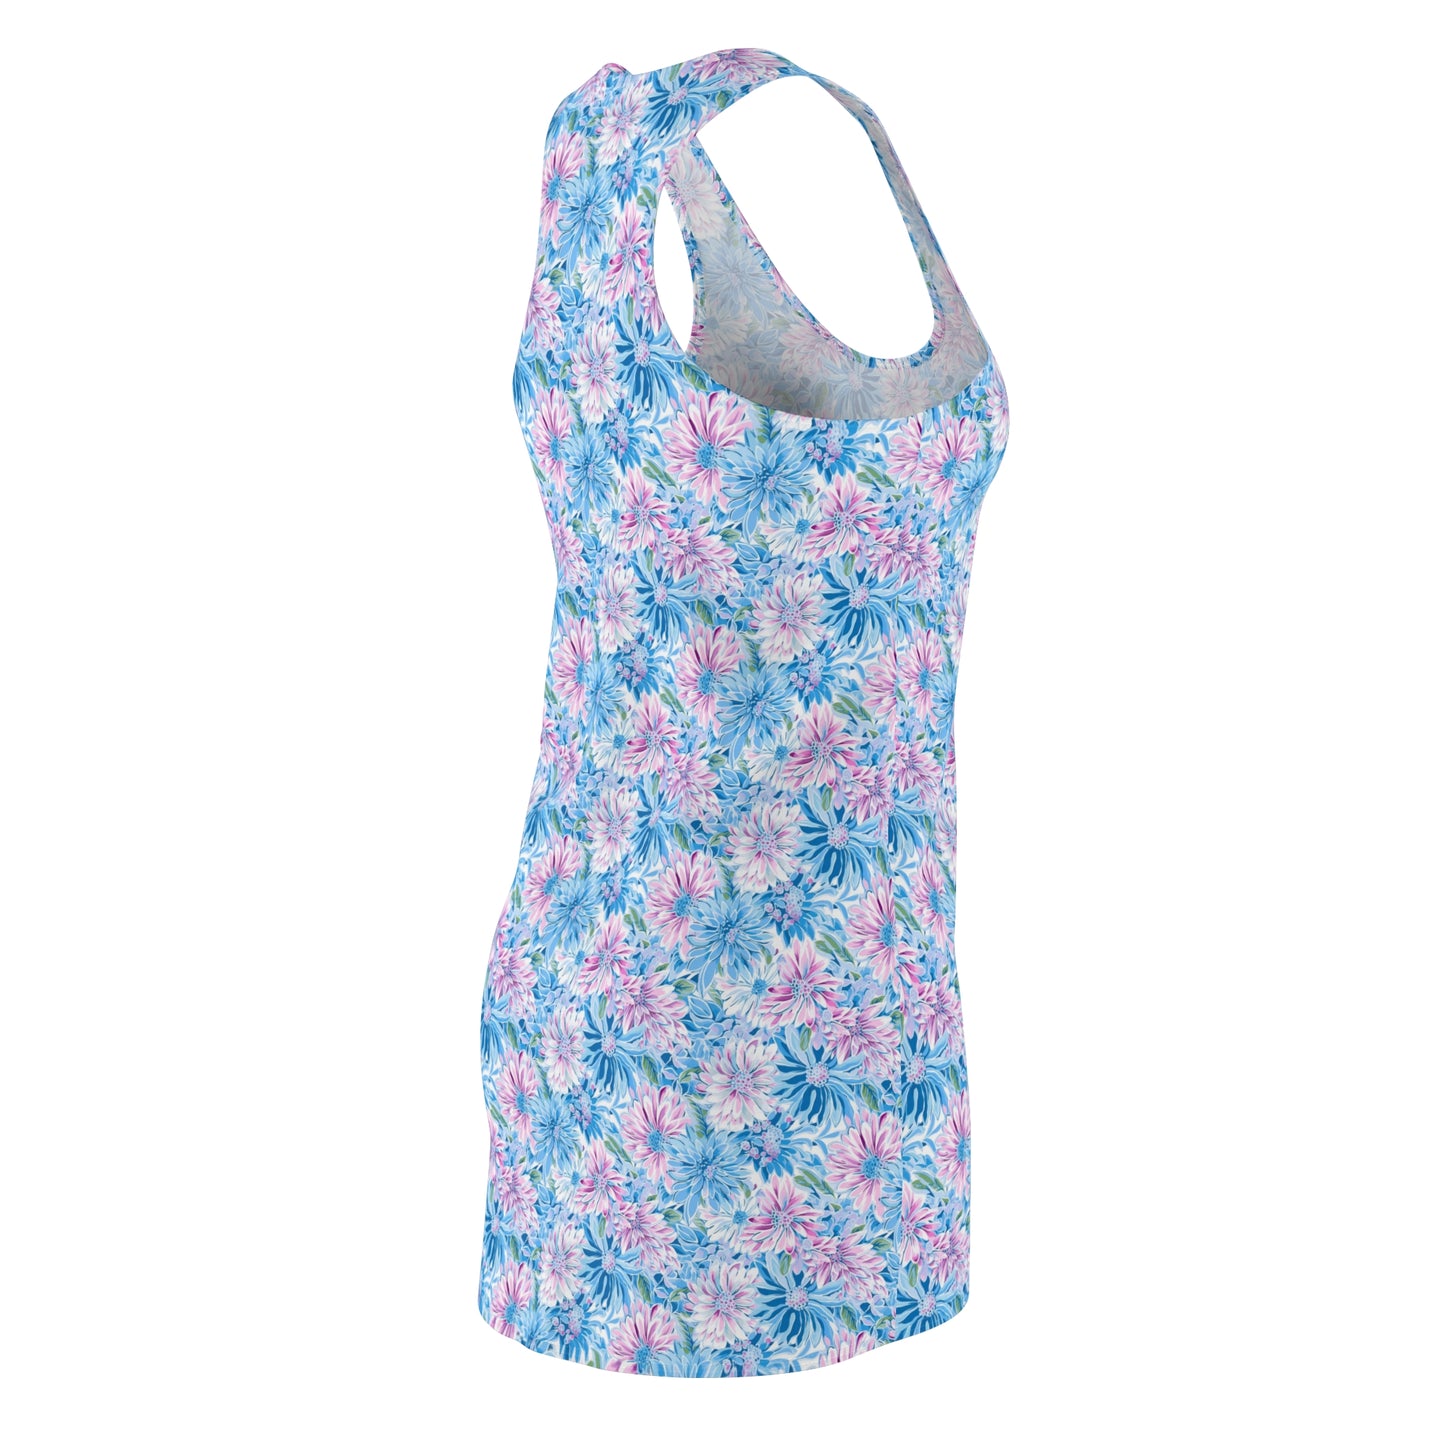 Pastel Blossom Symphony: Spring Flowers in Soft Pink and Blue Hues Women's Racerback Dress XS - 2XL